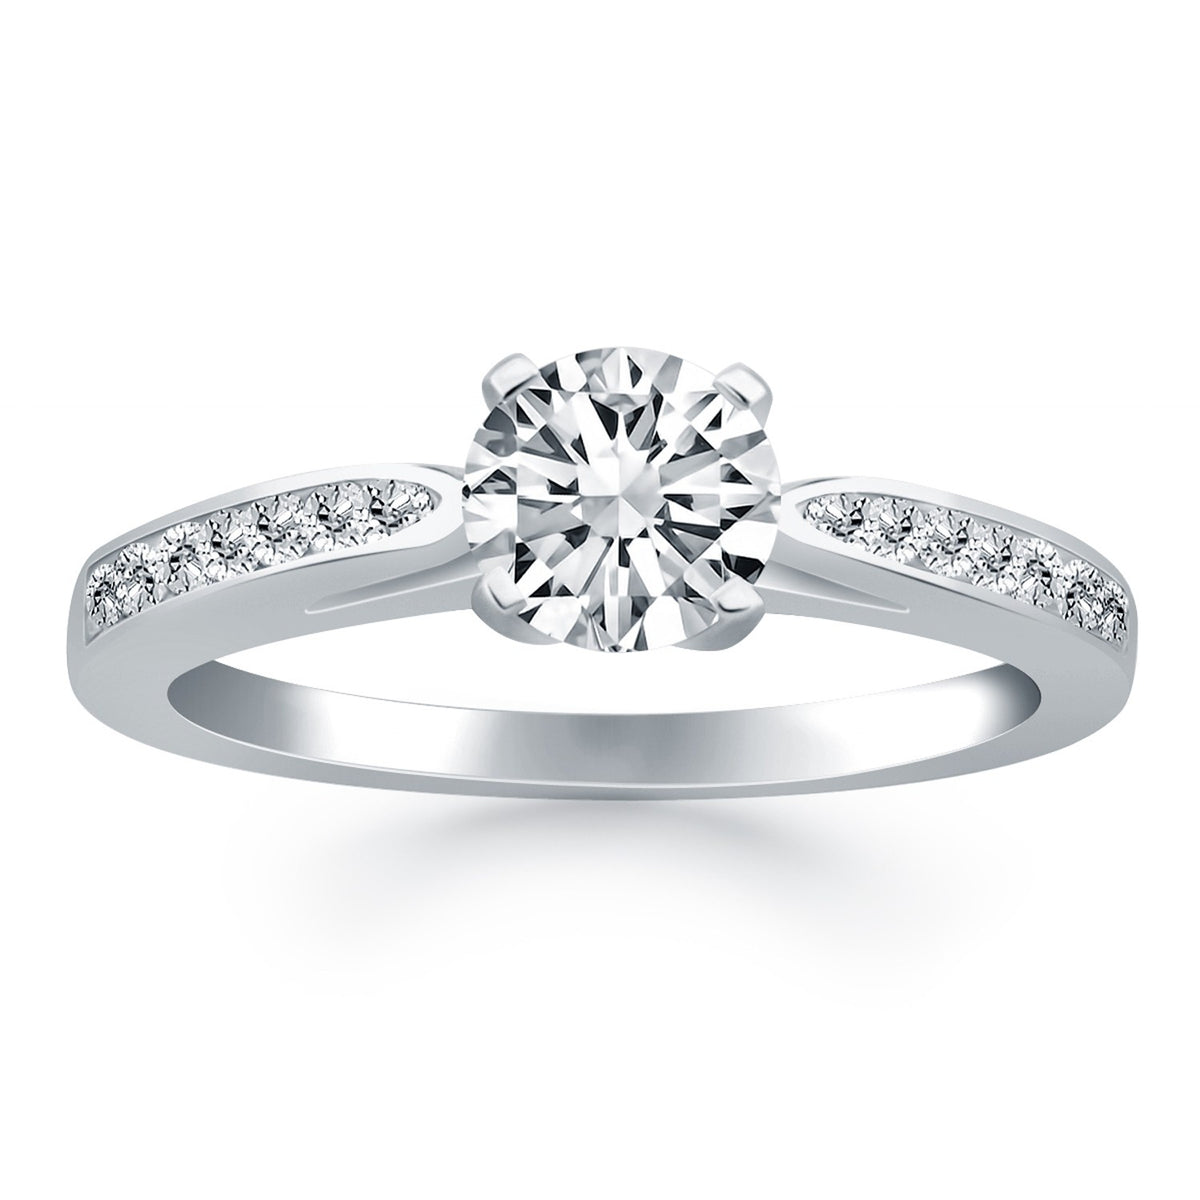 Cathedral Engagement Ring with Pave Diamonds - 14k White Gold